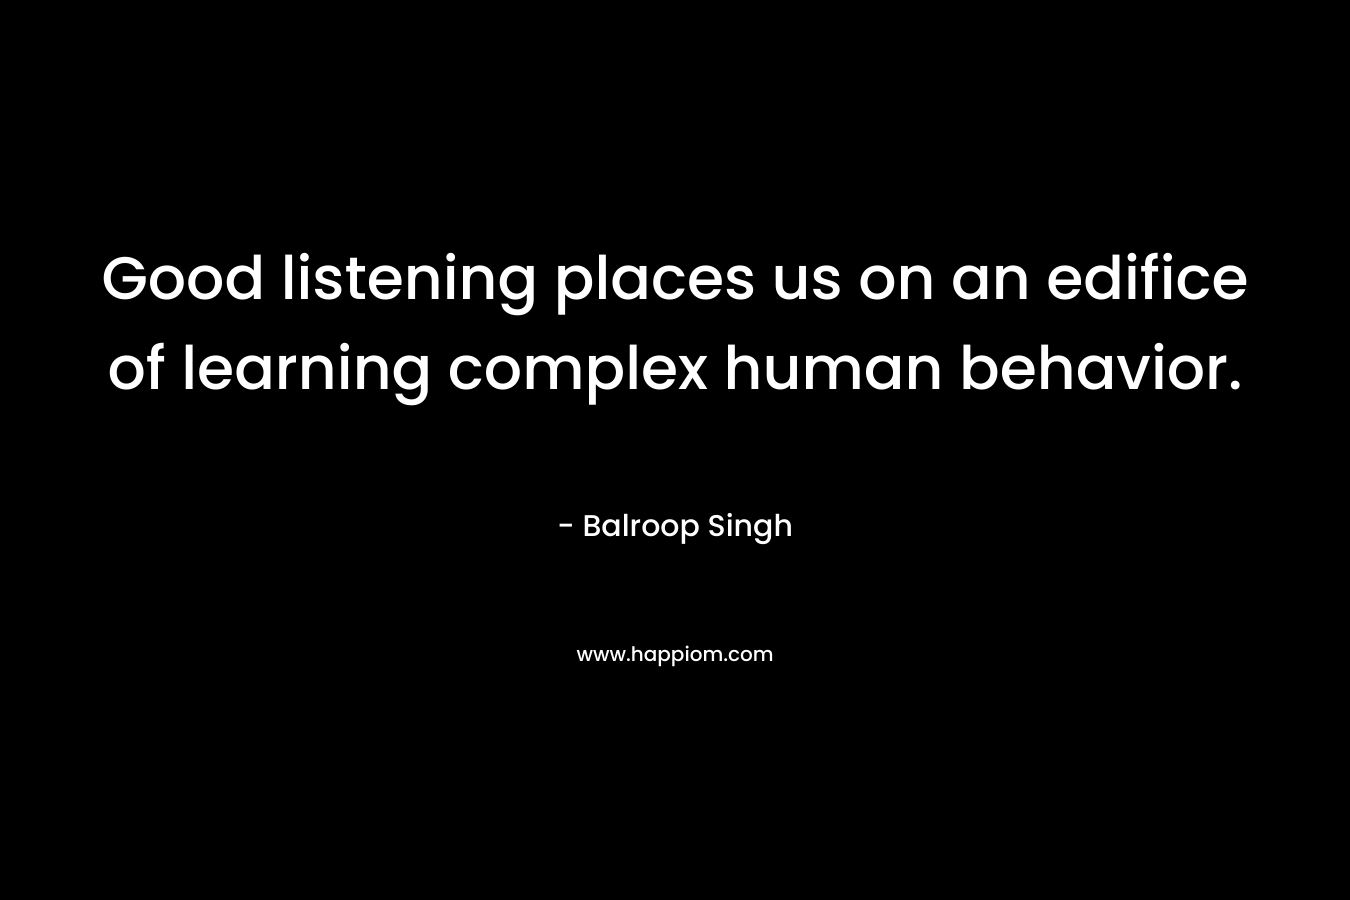 Good listening places us on an edifice of learning complex human behavior. – Balroop Singh